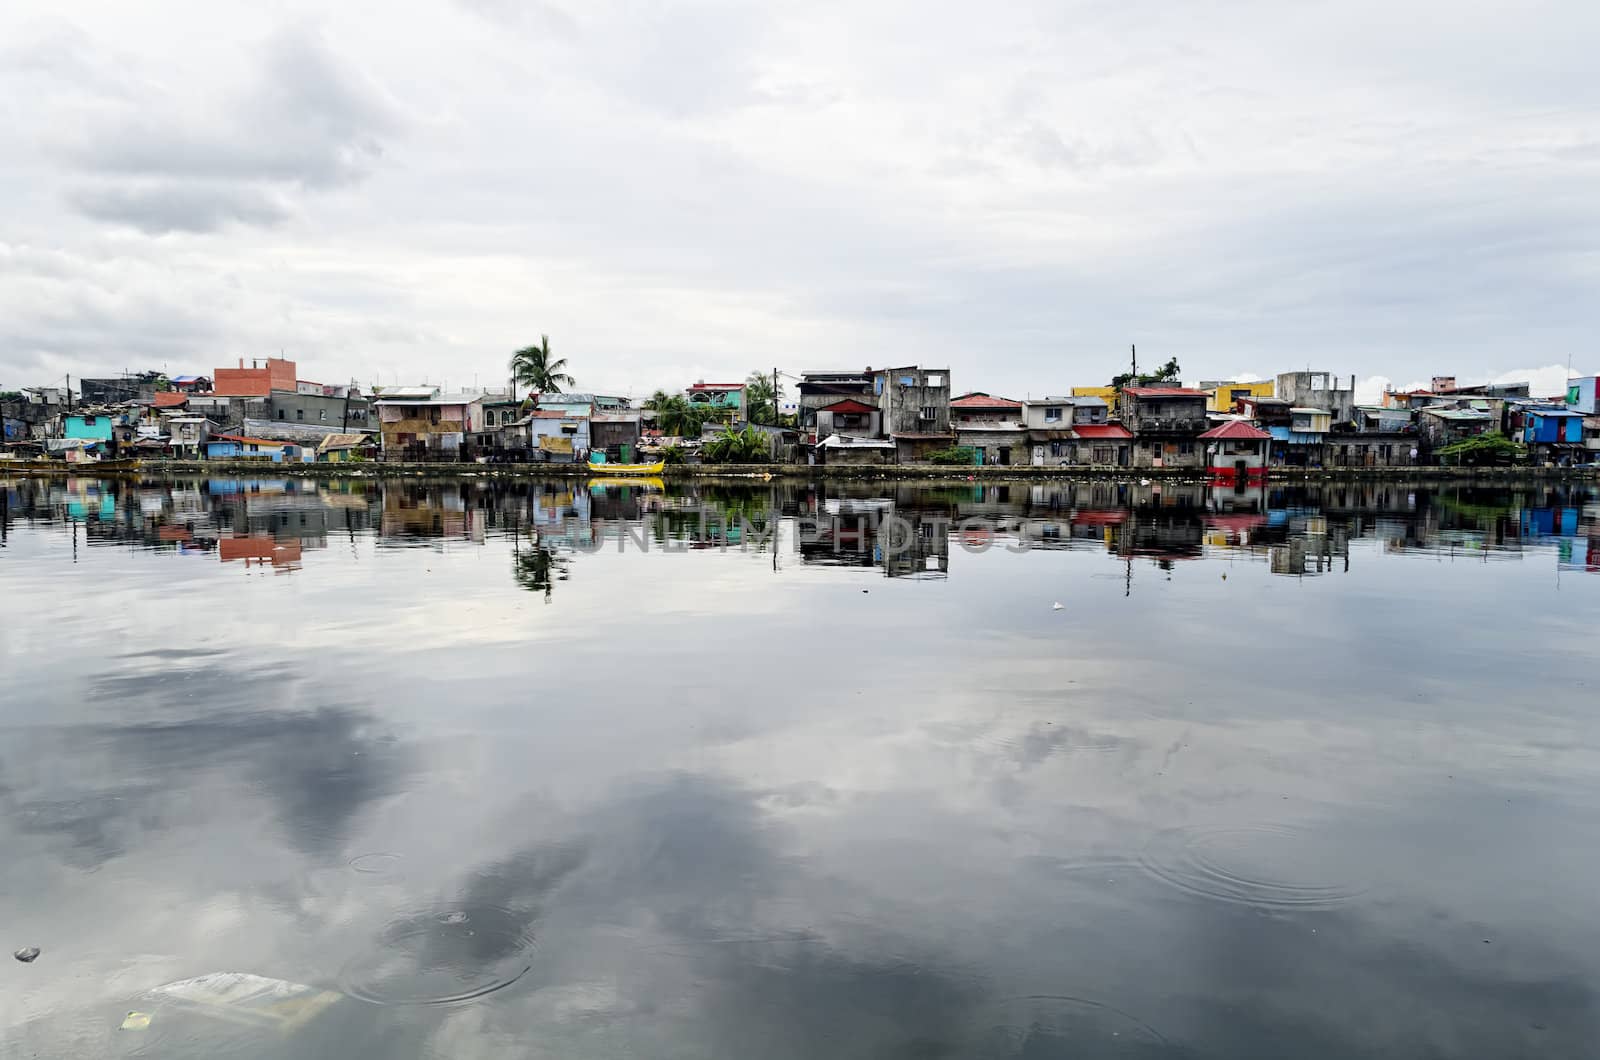 Rows of houses along the Malabon River in Metro Manila, Philippines